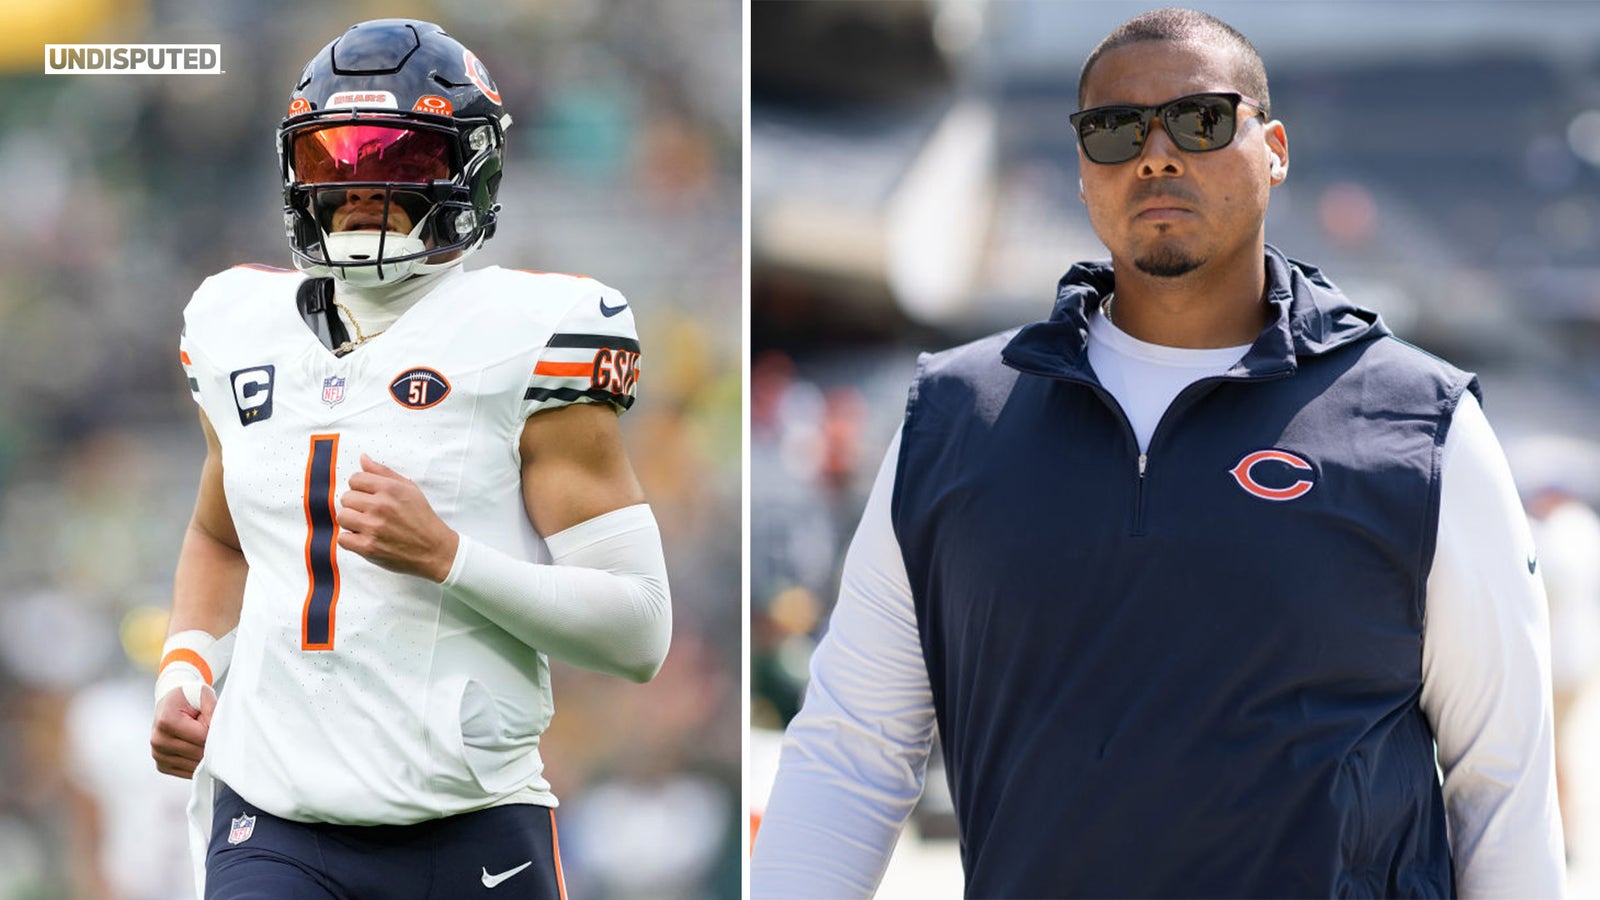 Bears GM Ryan Poles: 'I want to do right by Justin Fields' if QB is traded 